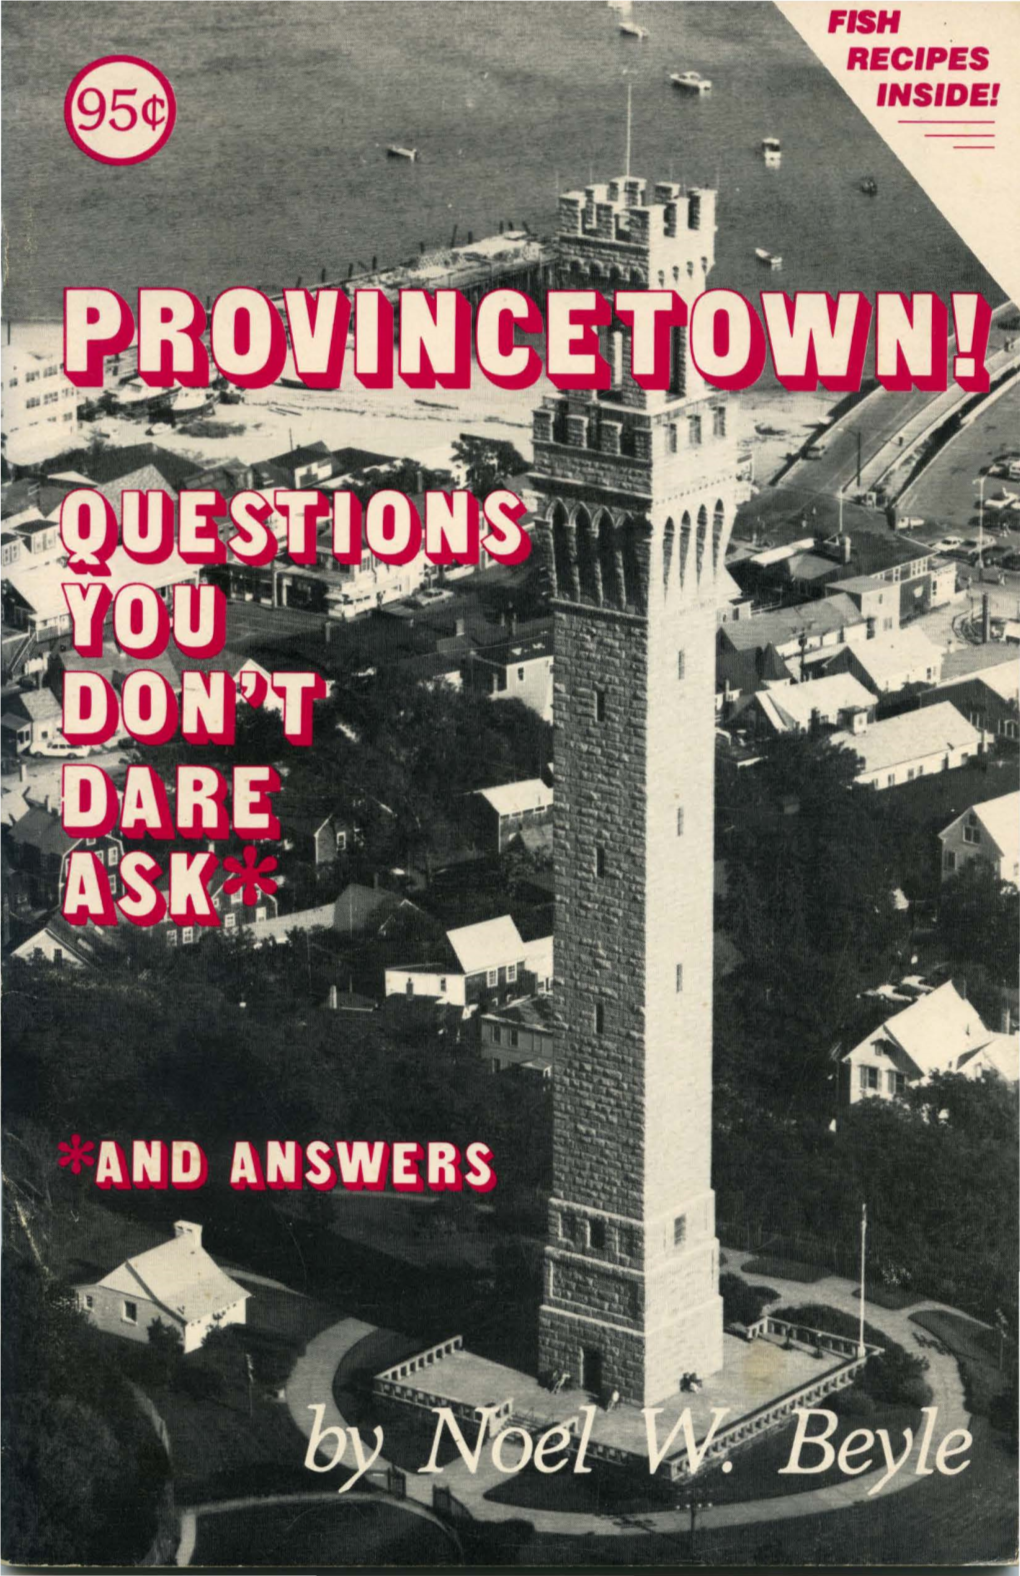 RECIPES INSIDE! PROVINCETOWN! QUESTIONS YOU DON't Please.No Tears